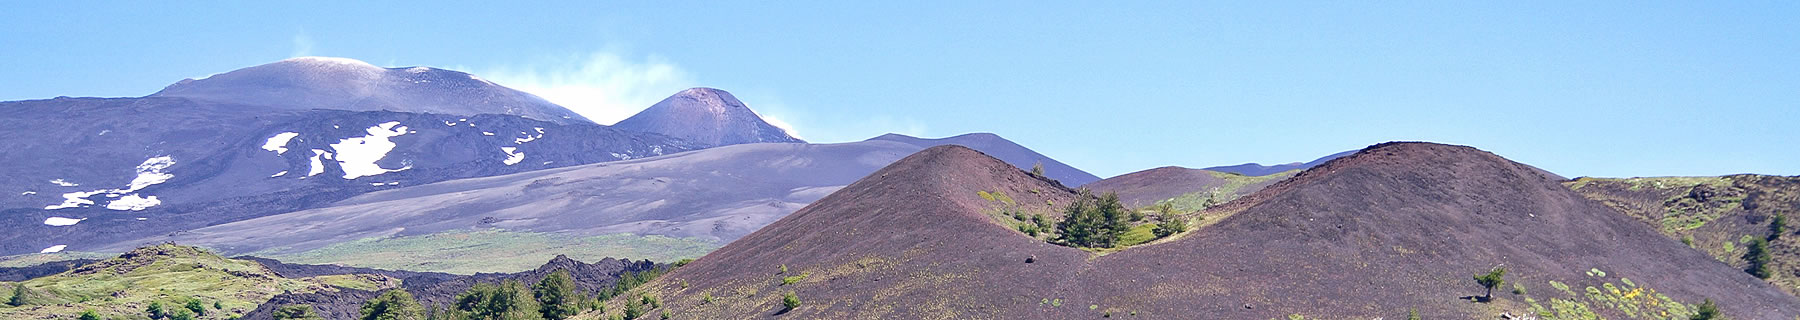 Offers and ideas - Mount Etna